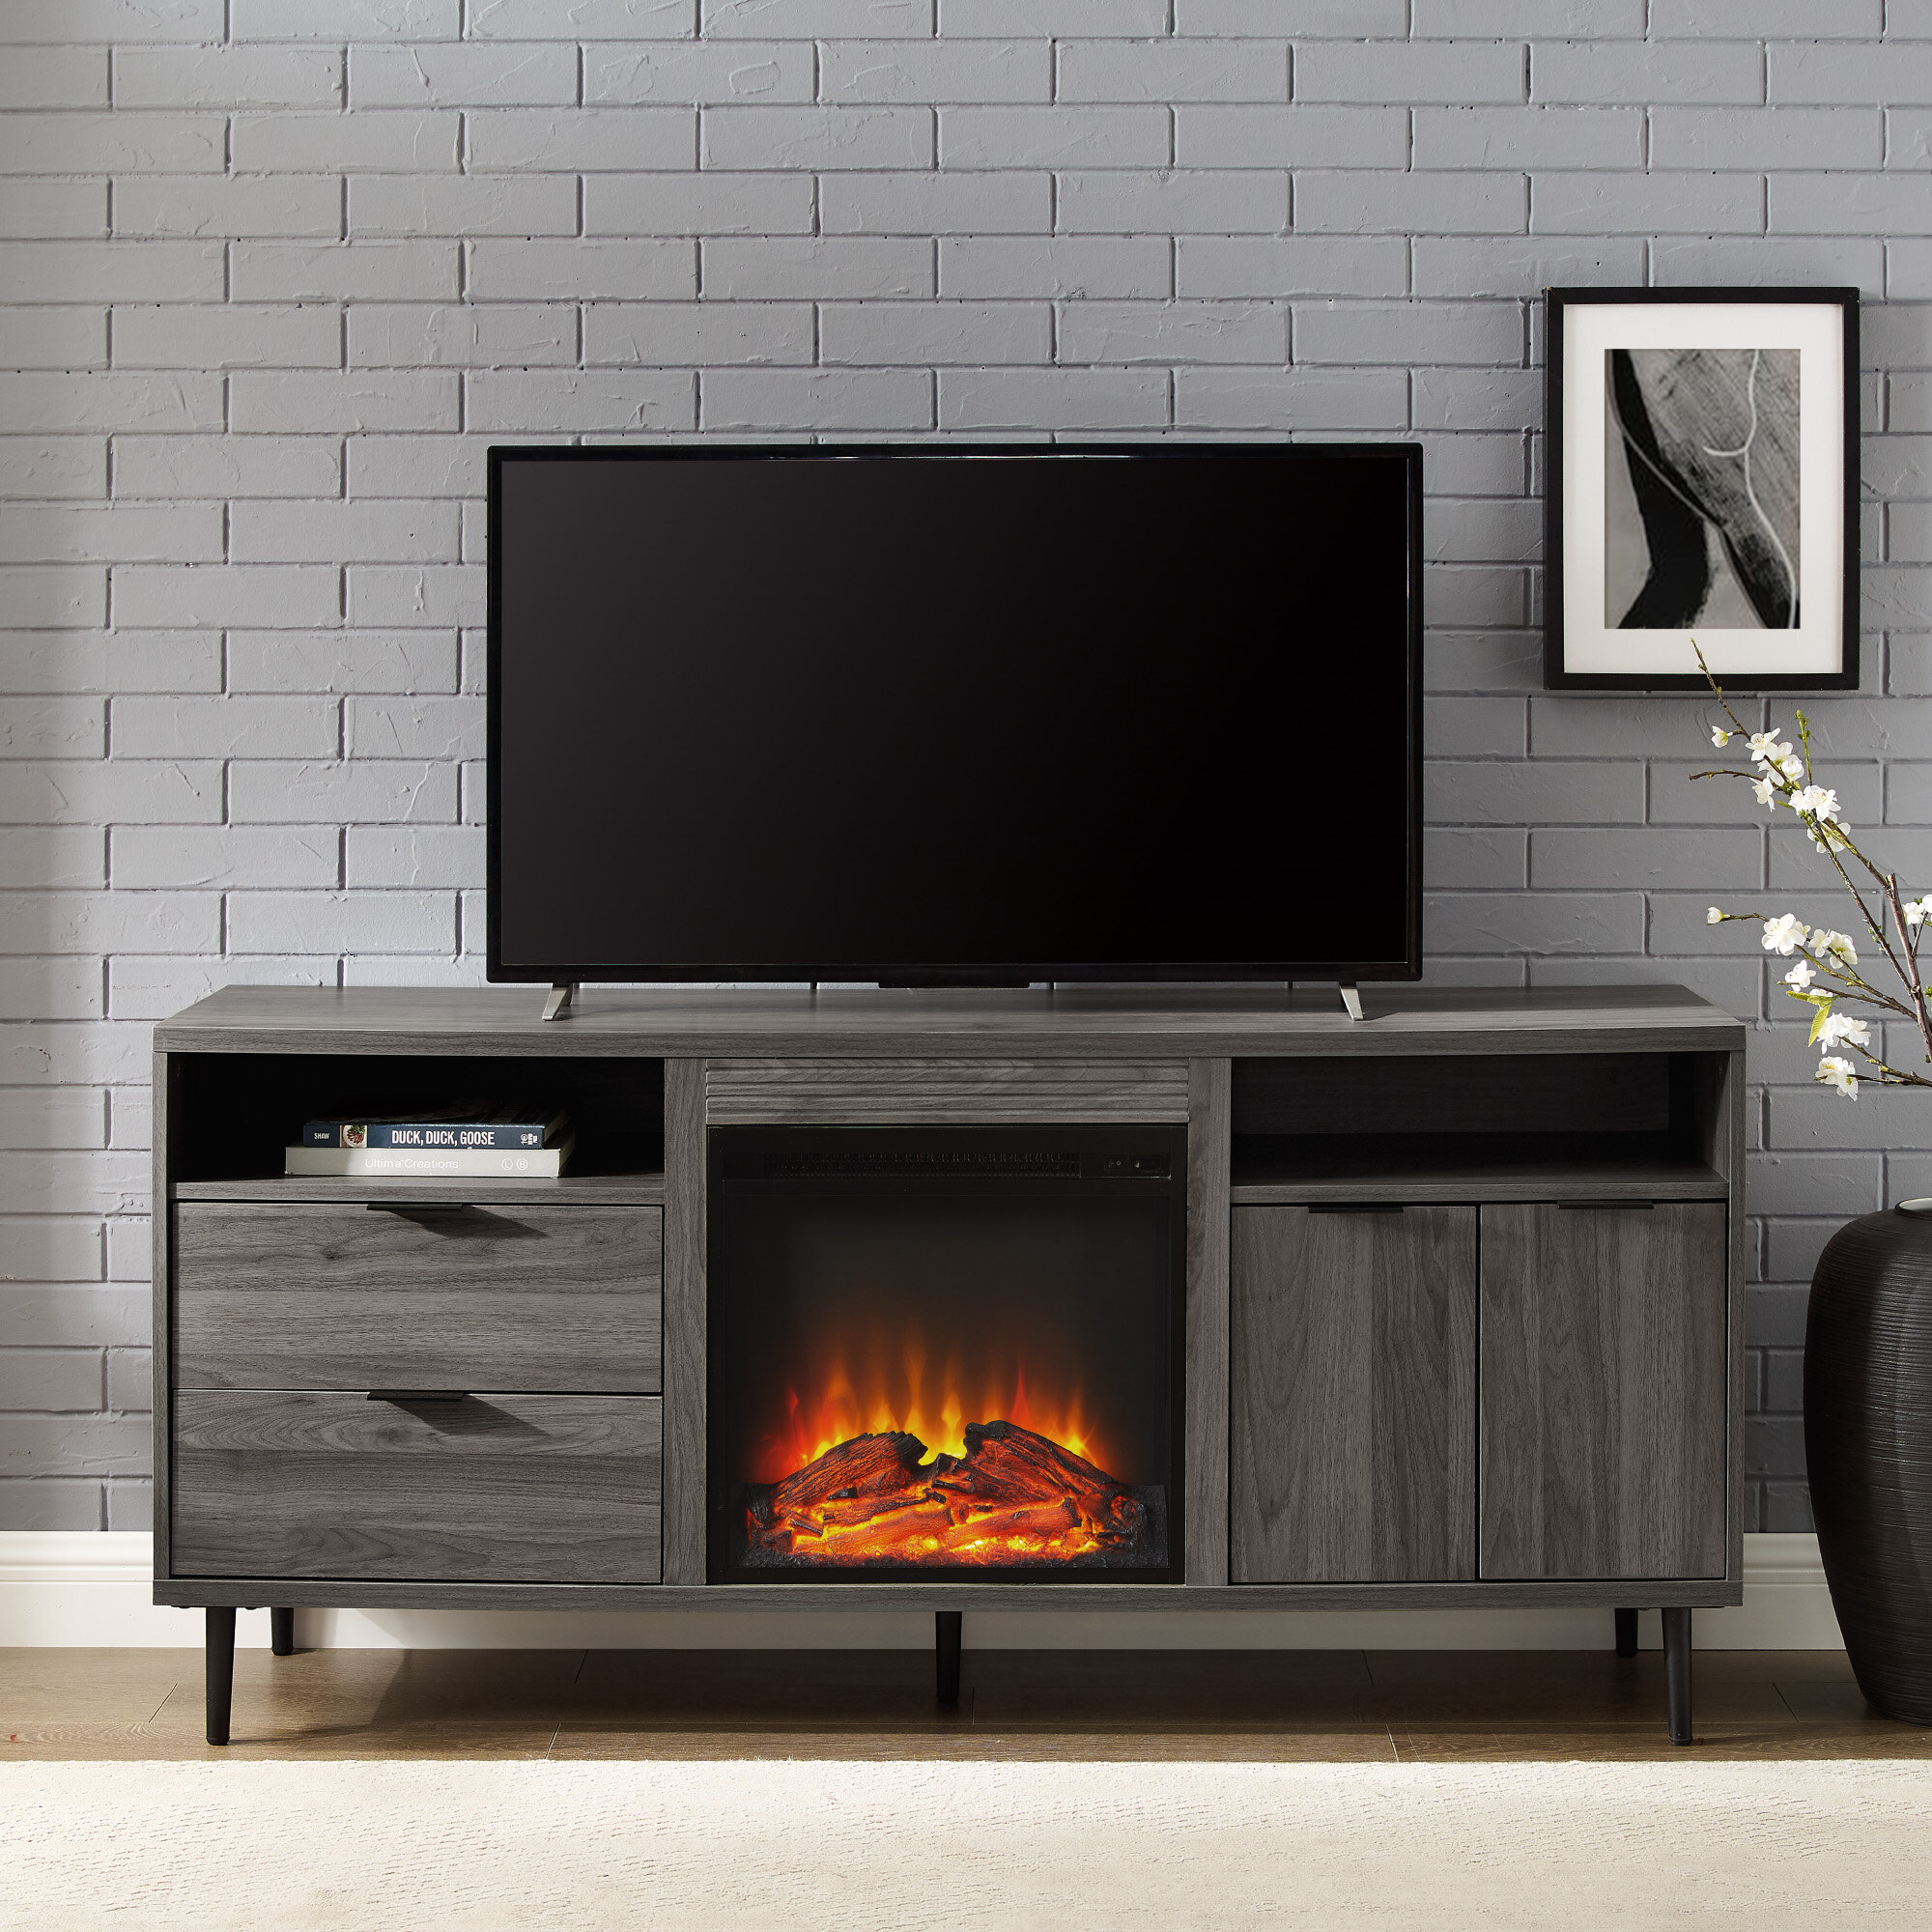 Eglinton TV Stand for TVs up to 65" with Electric Fireplace Included